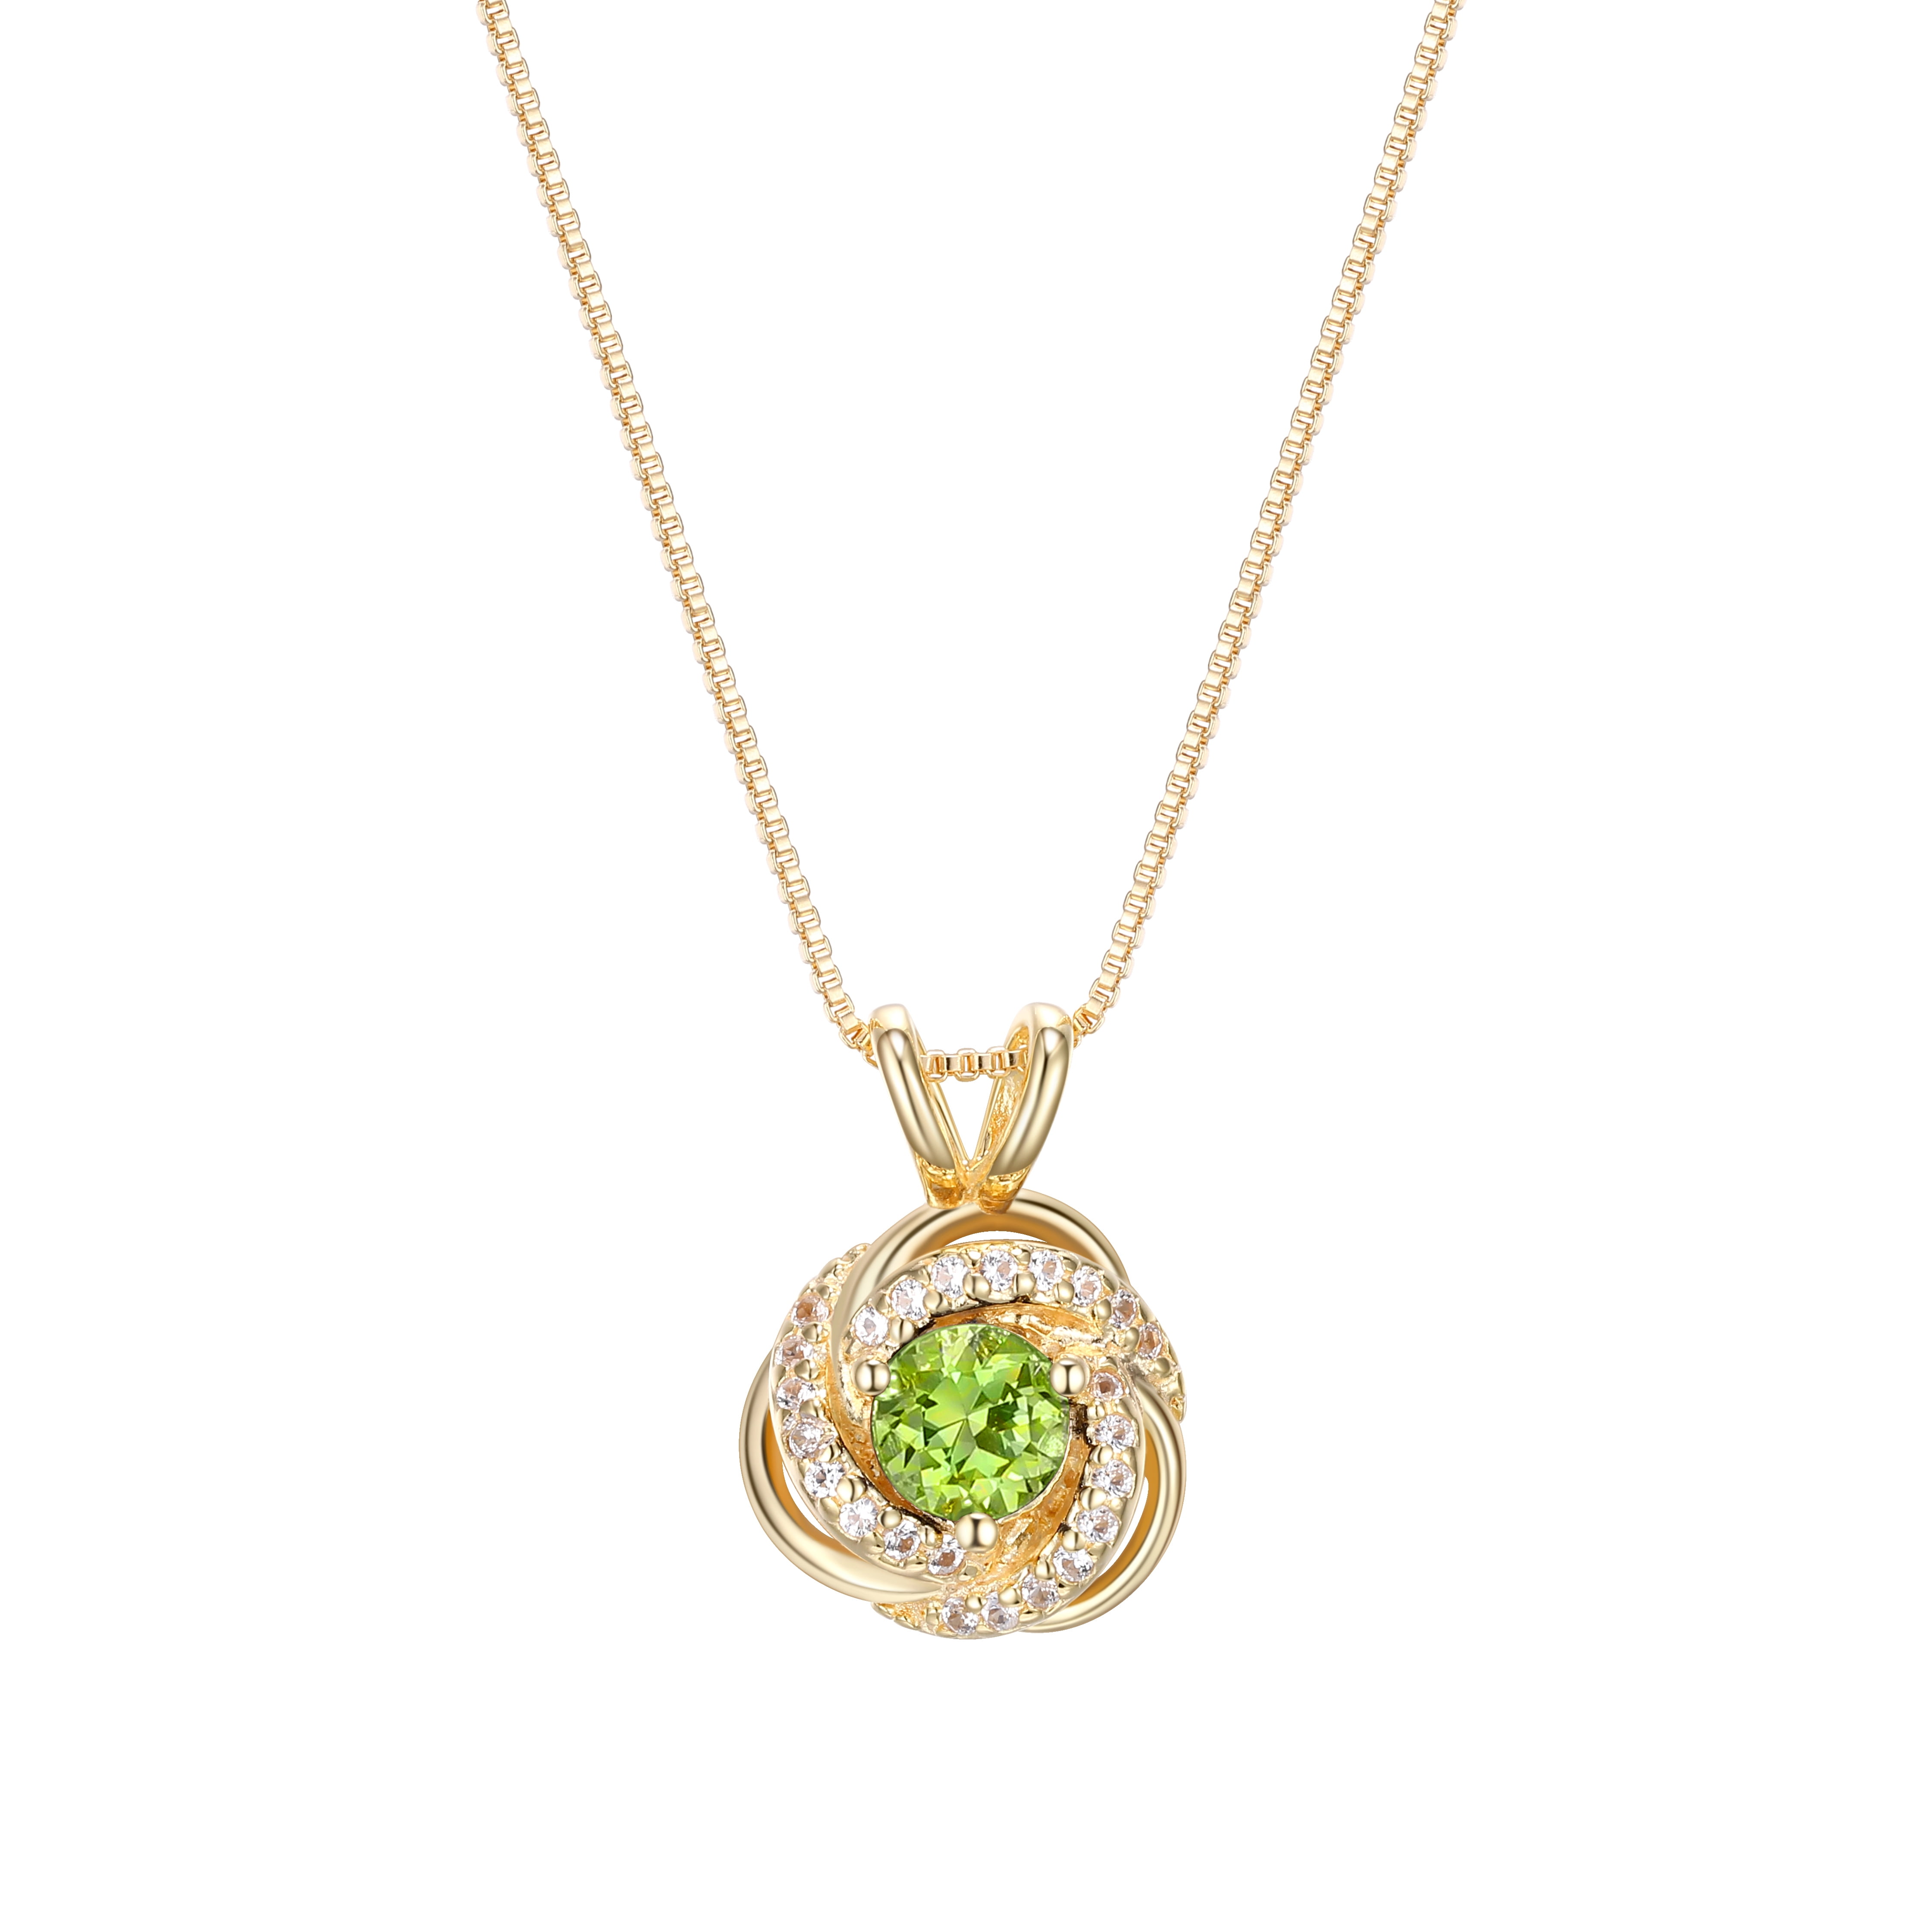 Birthday Gifts for Women January Birthstone Necklace Garnet I Love You to the Moon and Back Necklace Blue Sapphire Peridot Citrine Pink Tourmaline and More Stones Sterling Silver Jewelry